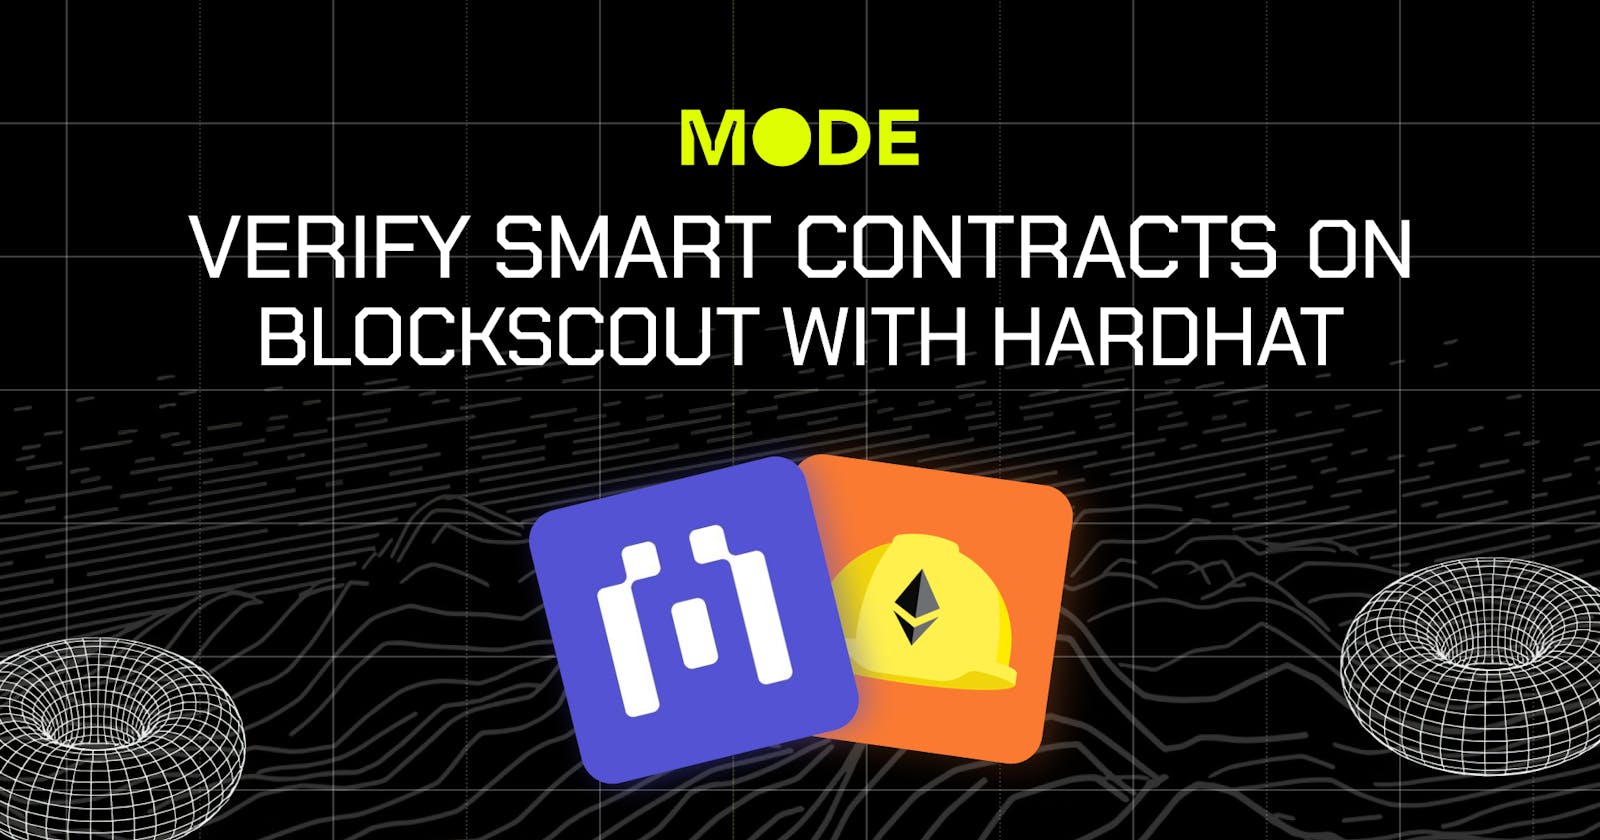 How to Verify Smart Contracts on BlockScout with Hardhat